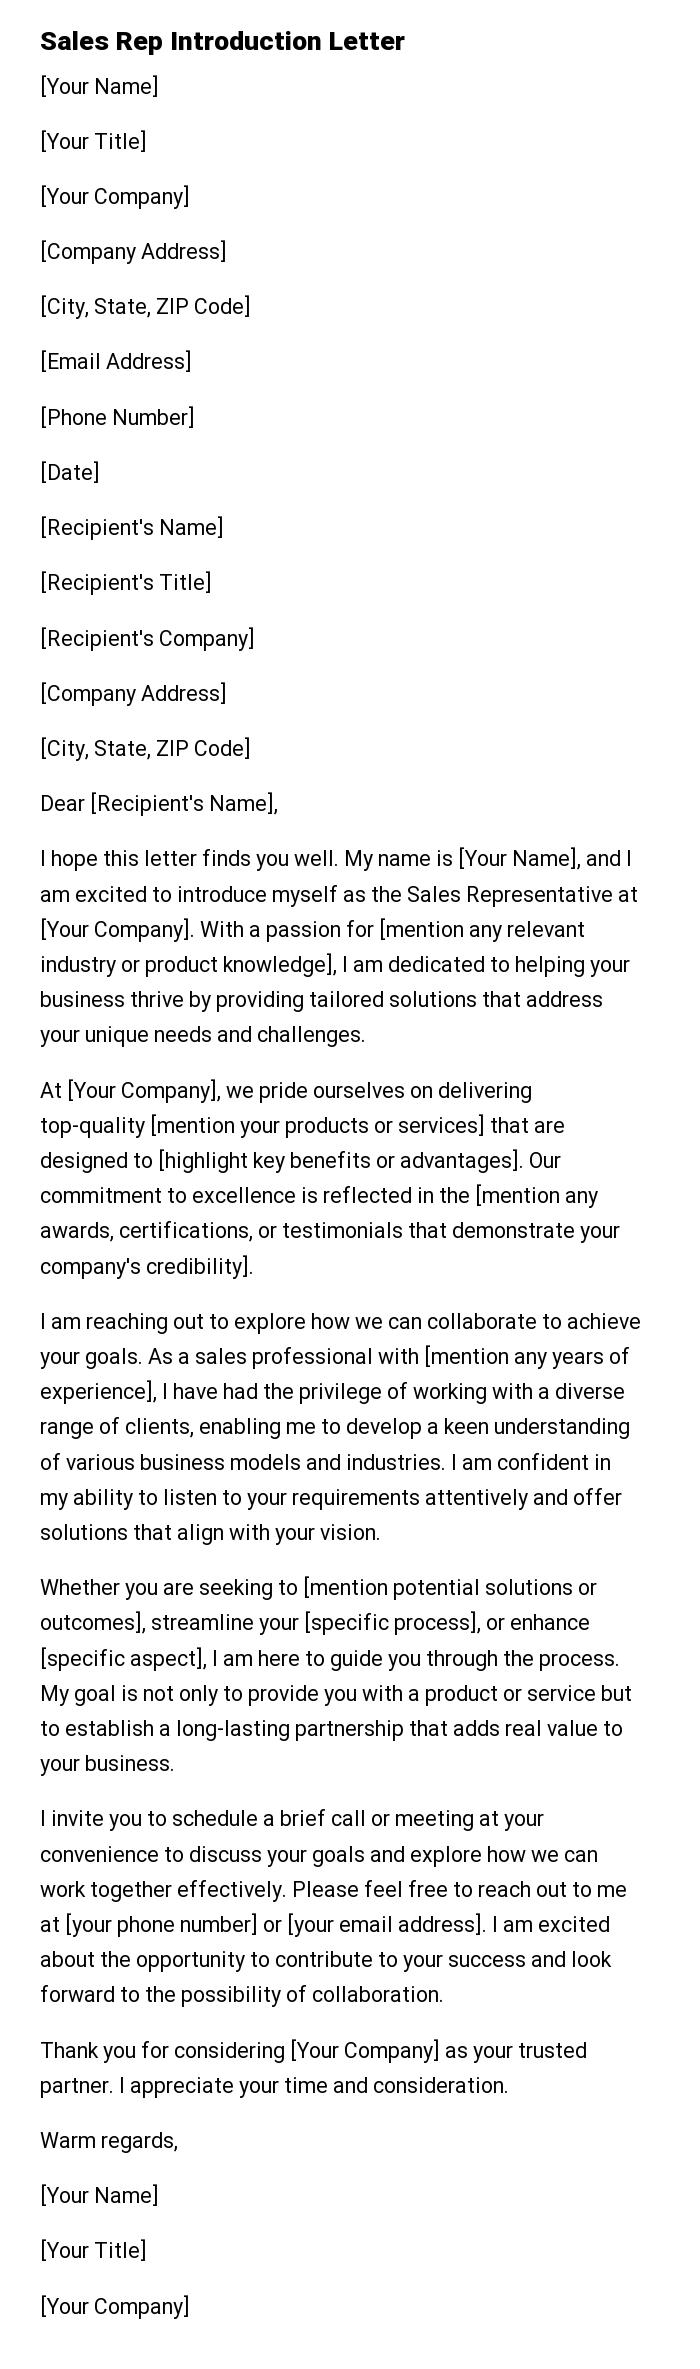 Sales Rep Introduction Letter